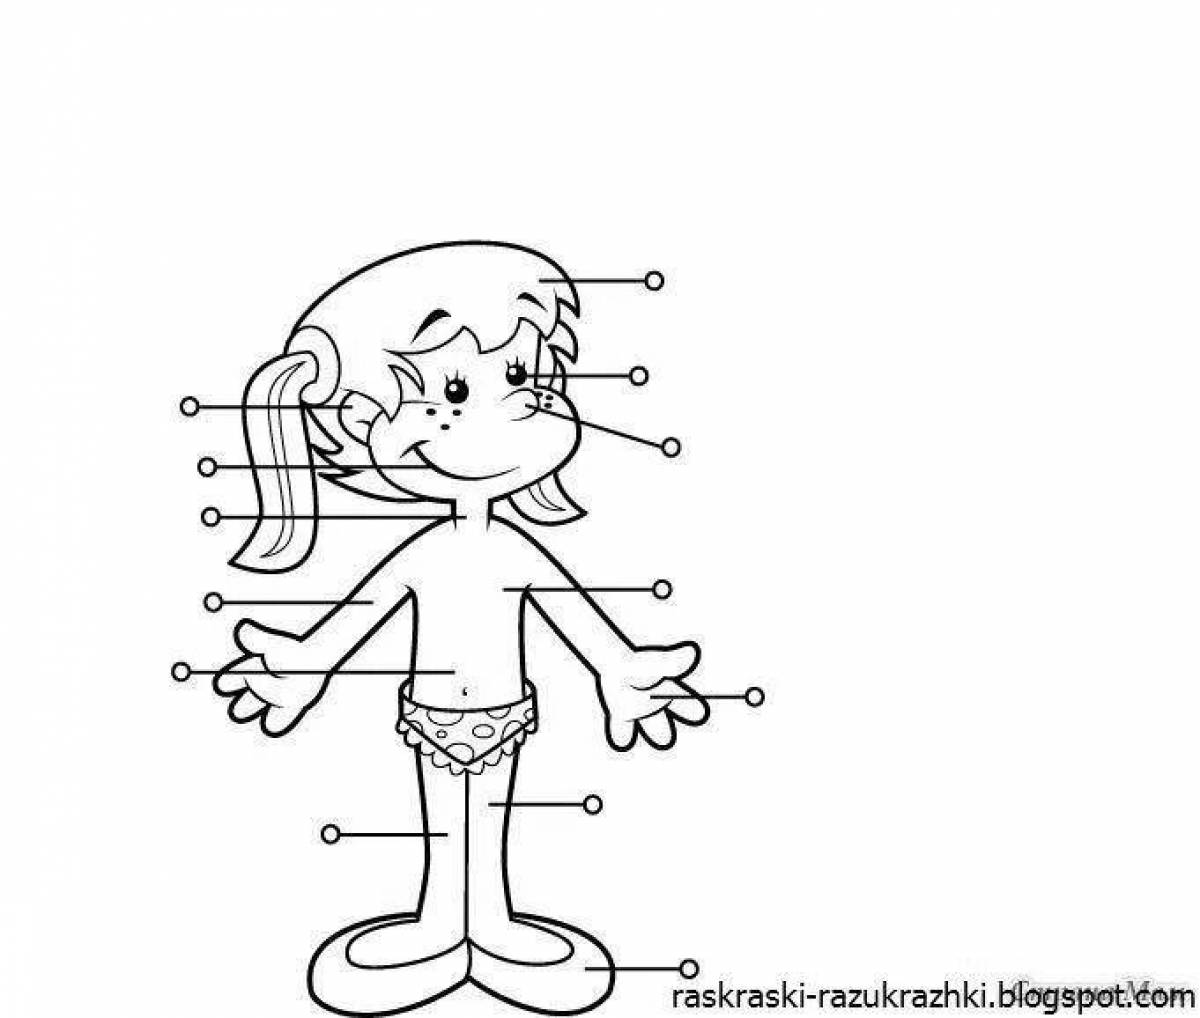 Charming human body structure coloring book